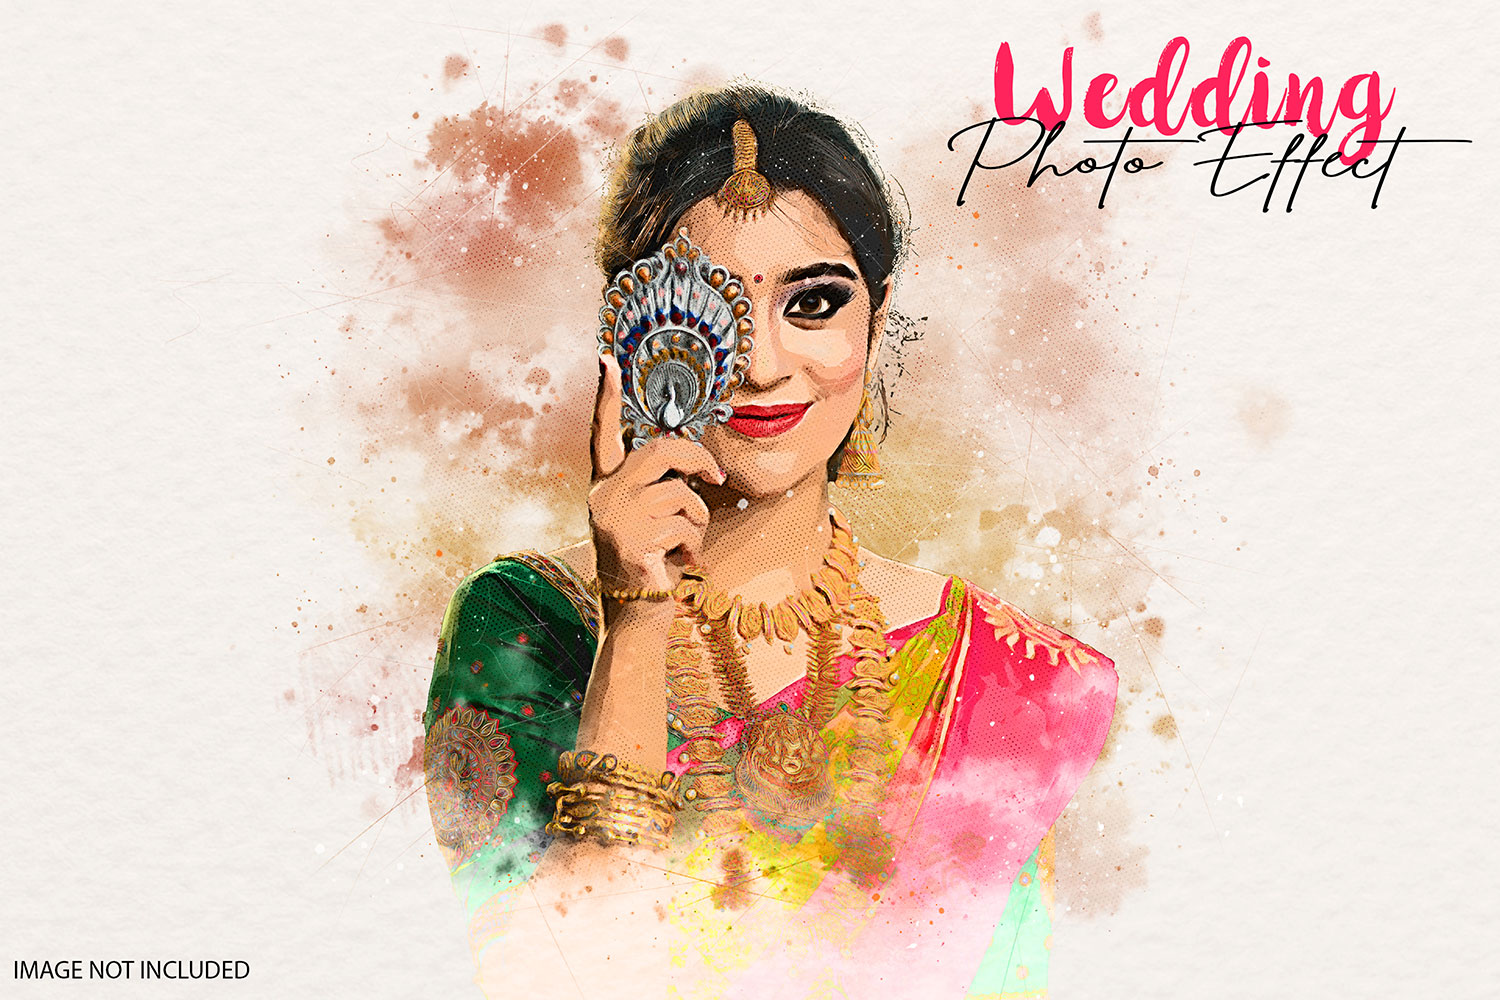 Wedding watercolor photo effect pinterest preview image.